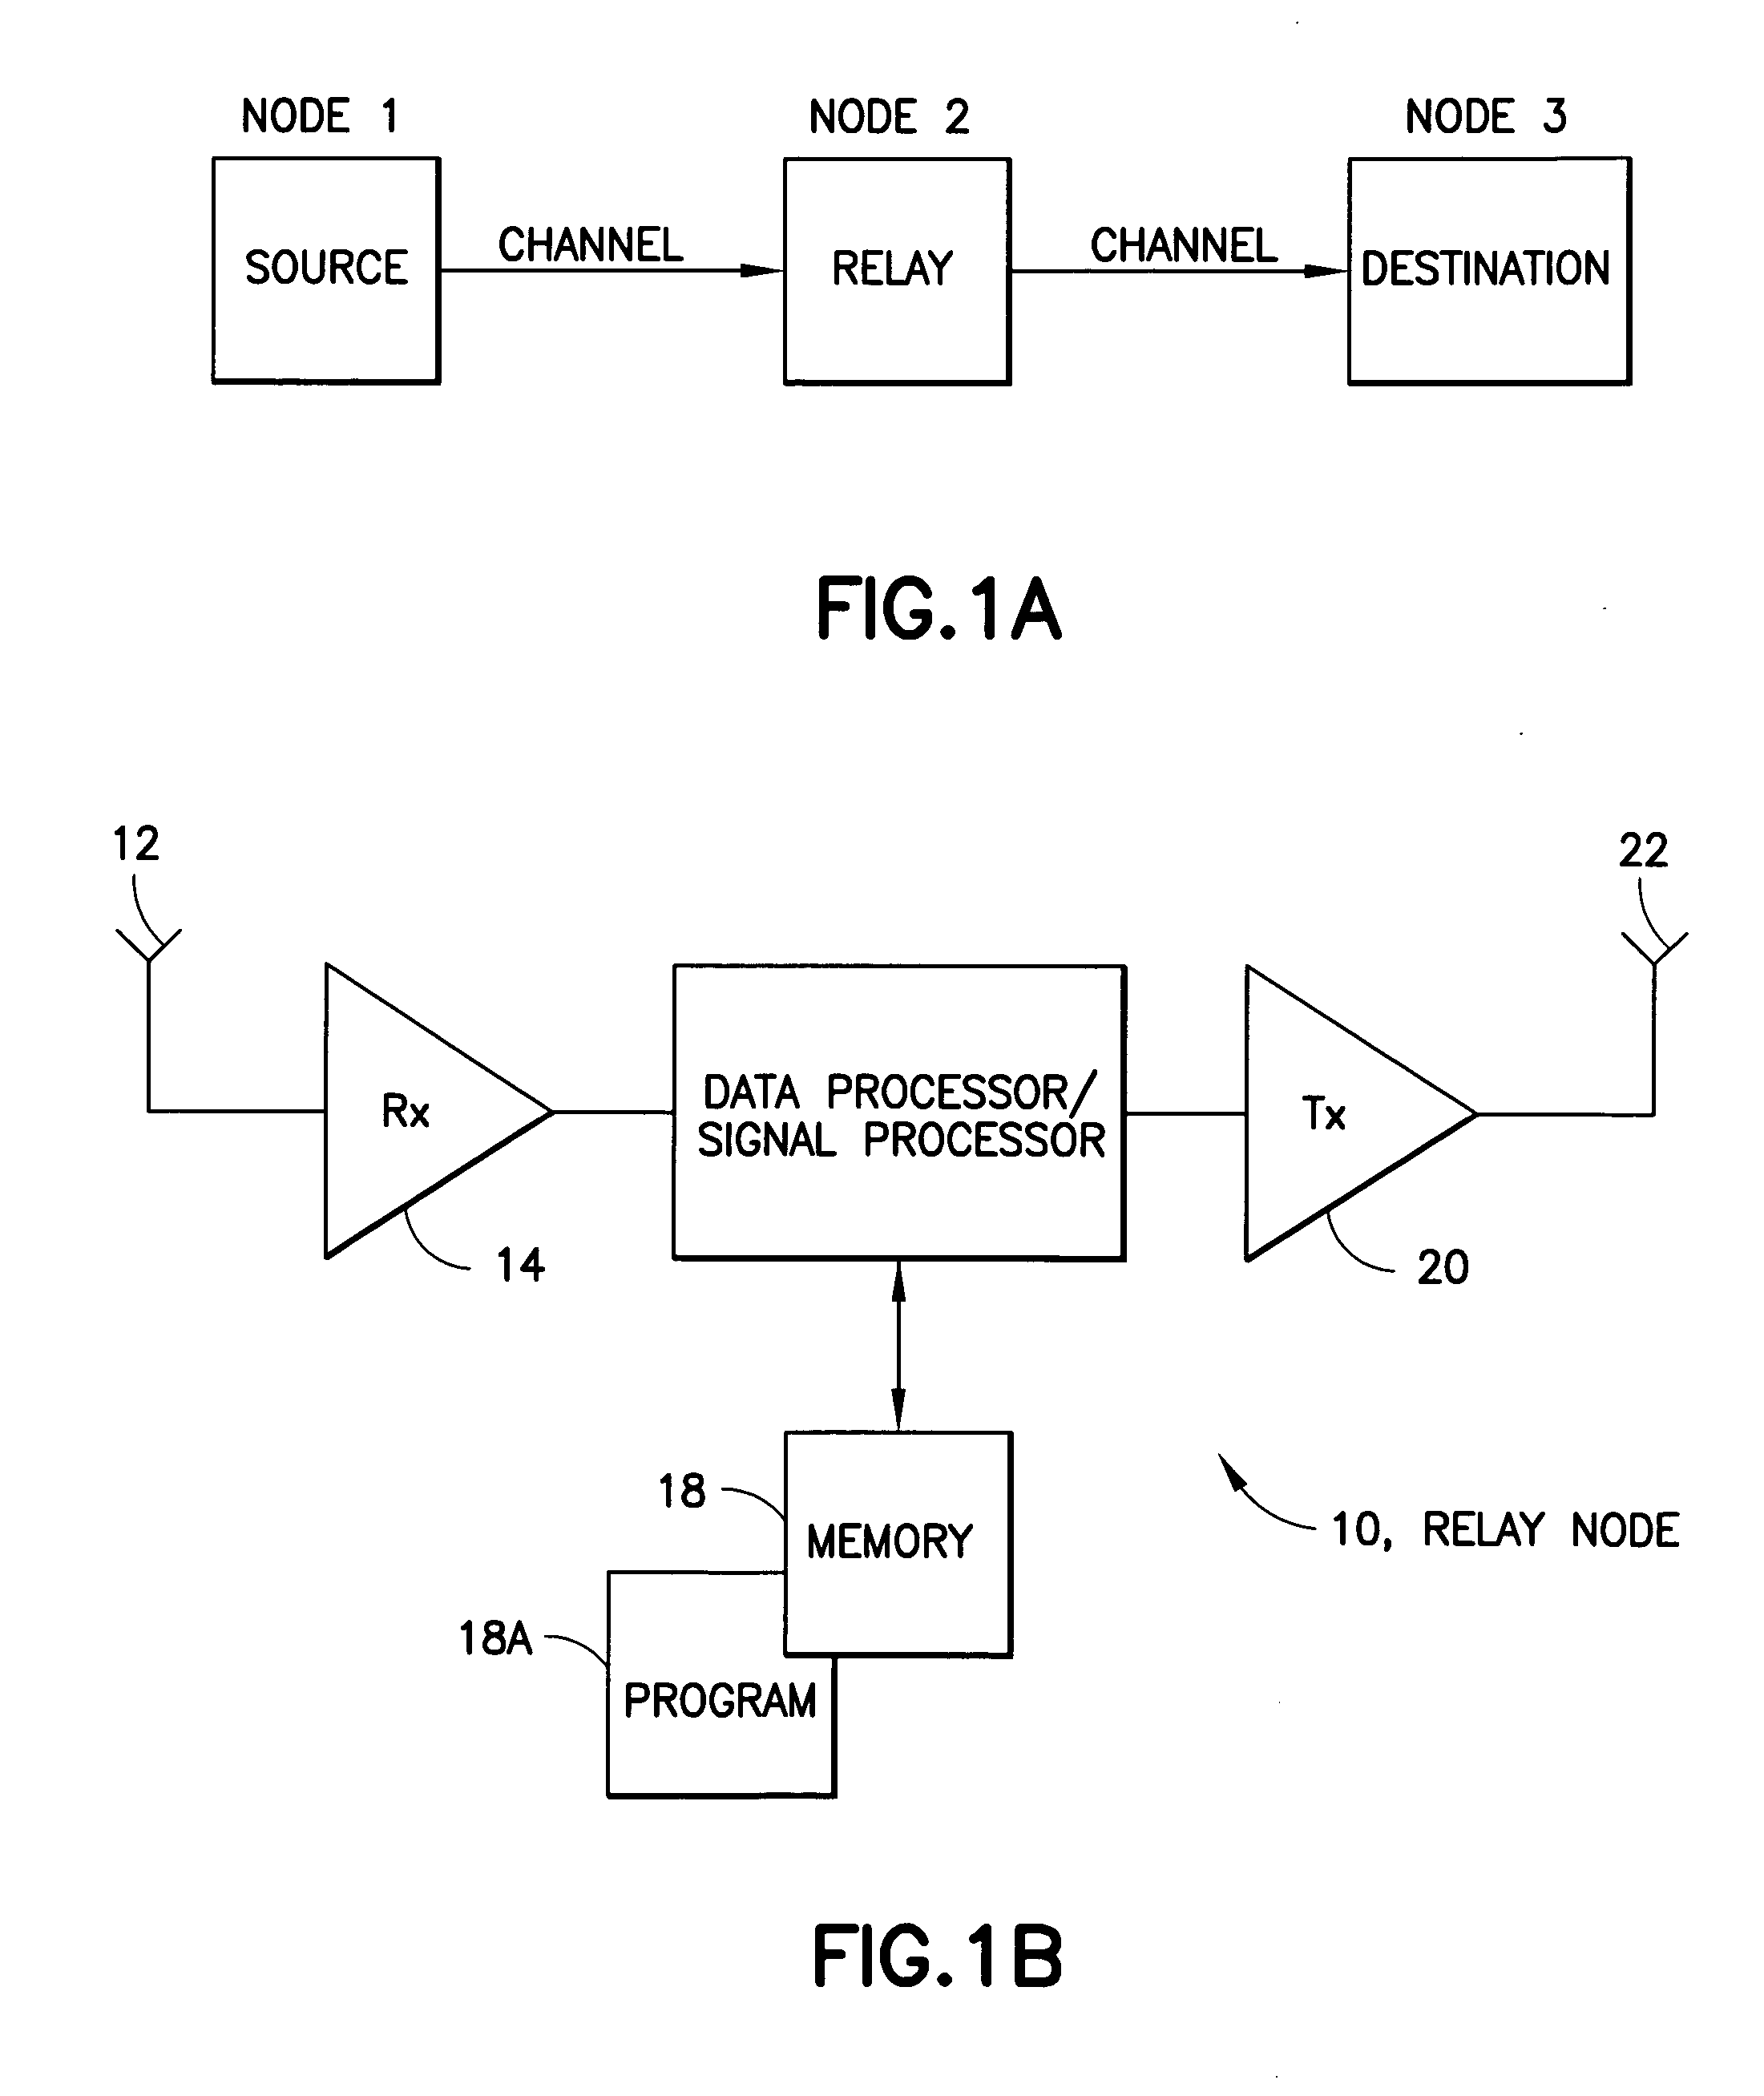 Apparatus, method and computer program product providing sub-channel assignment for relay node